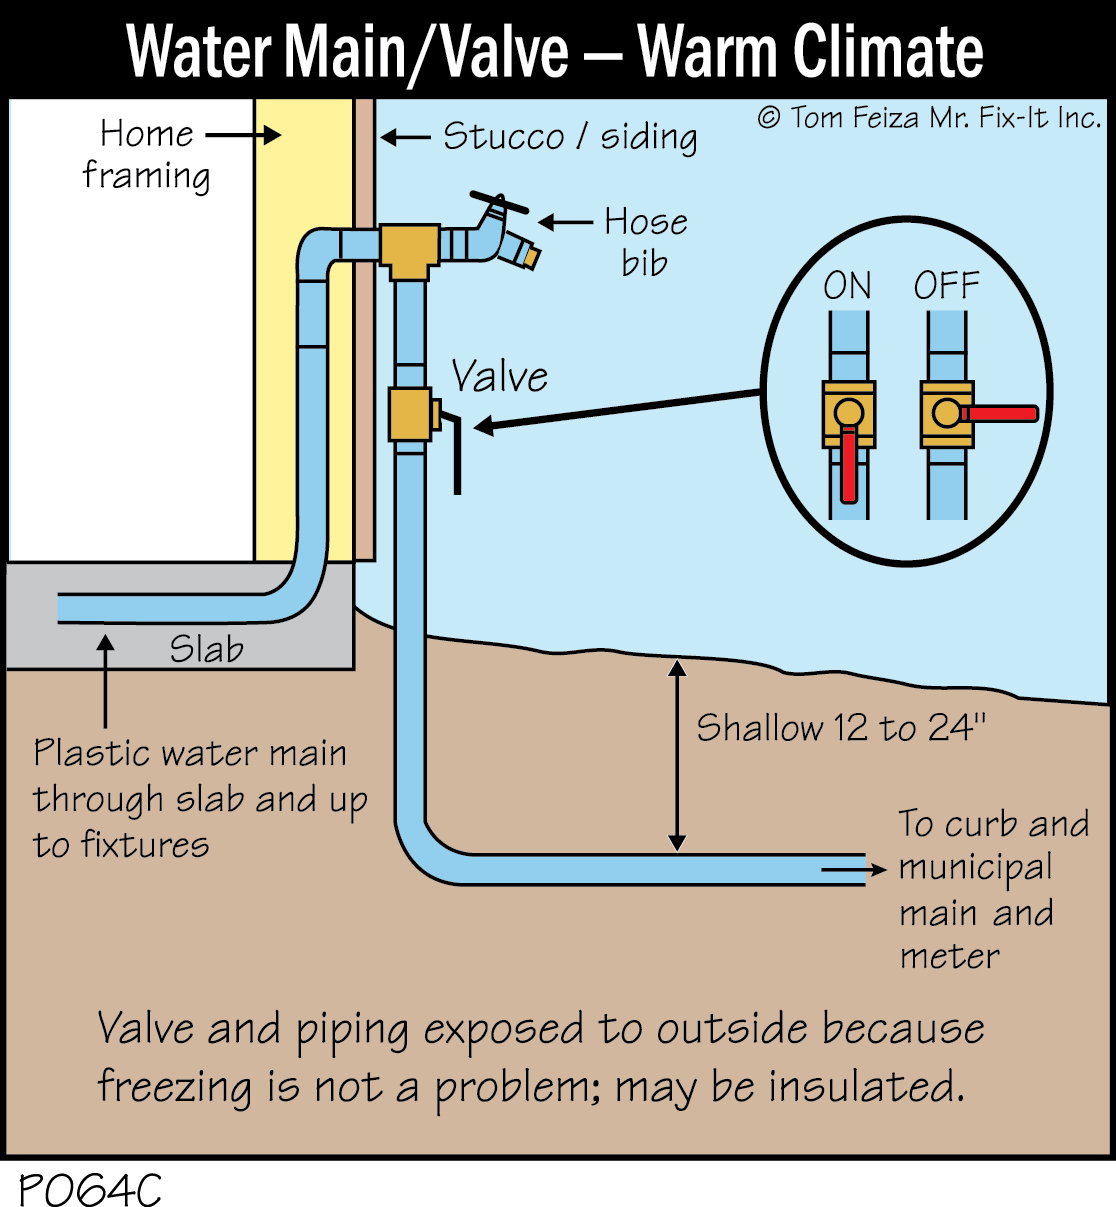 P064C - Water Supply-Valve Warm Climate